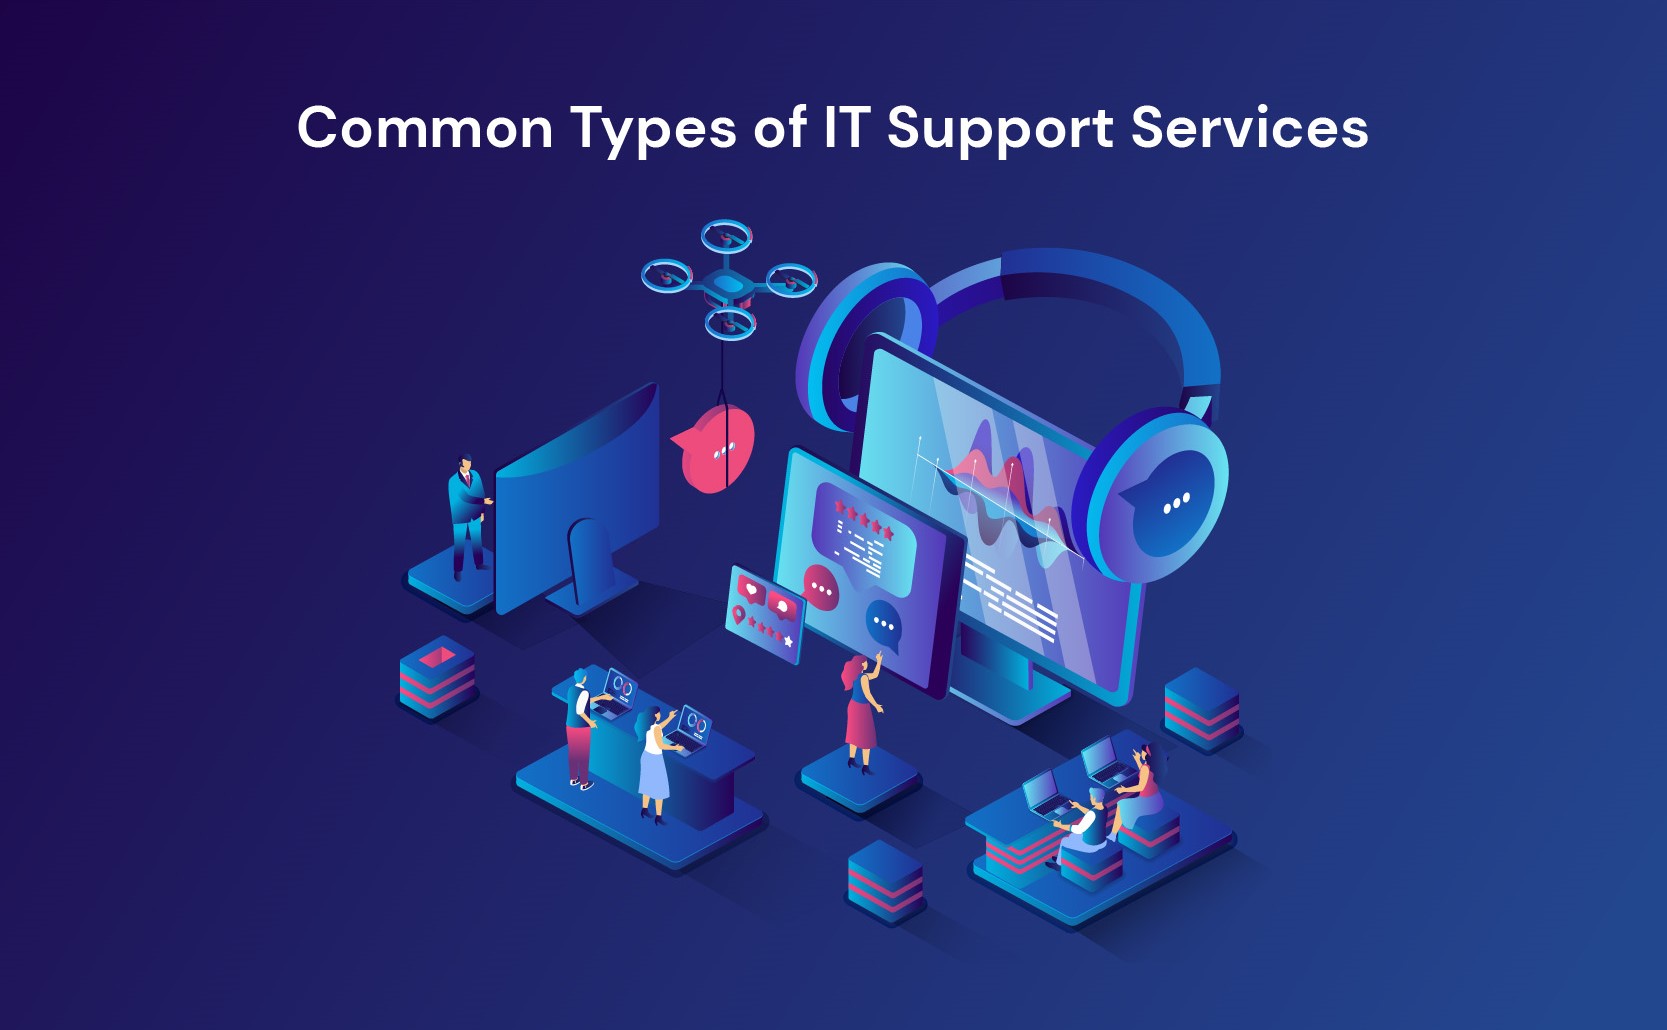 Common types of IT Support Services